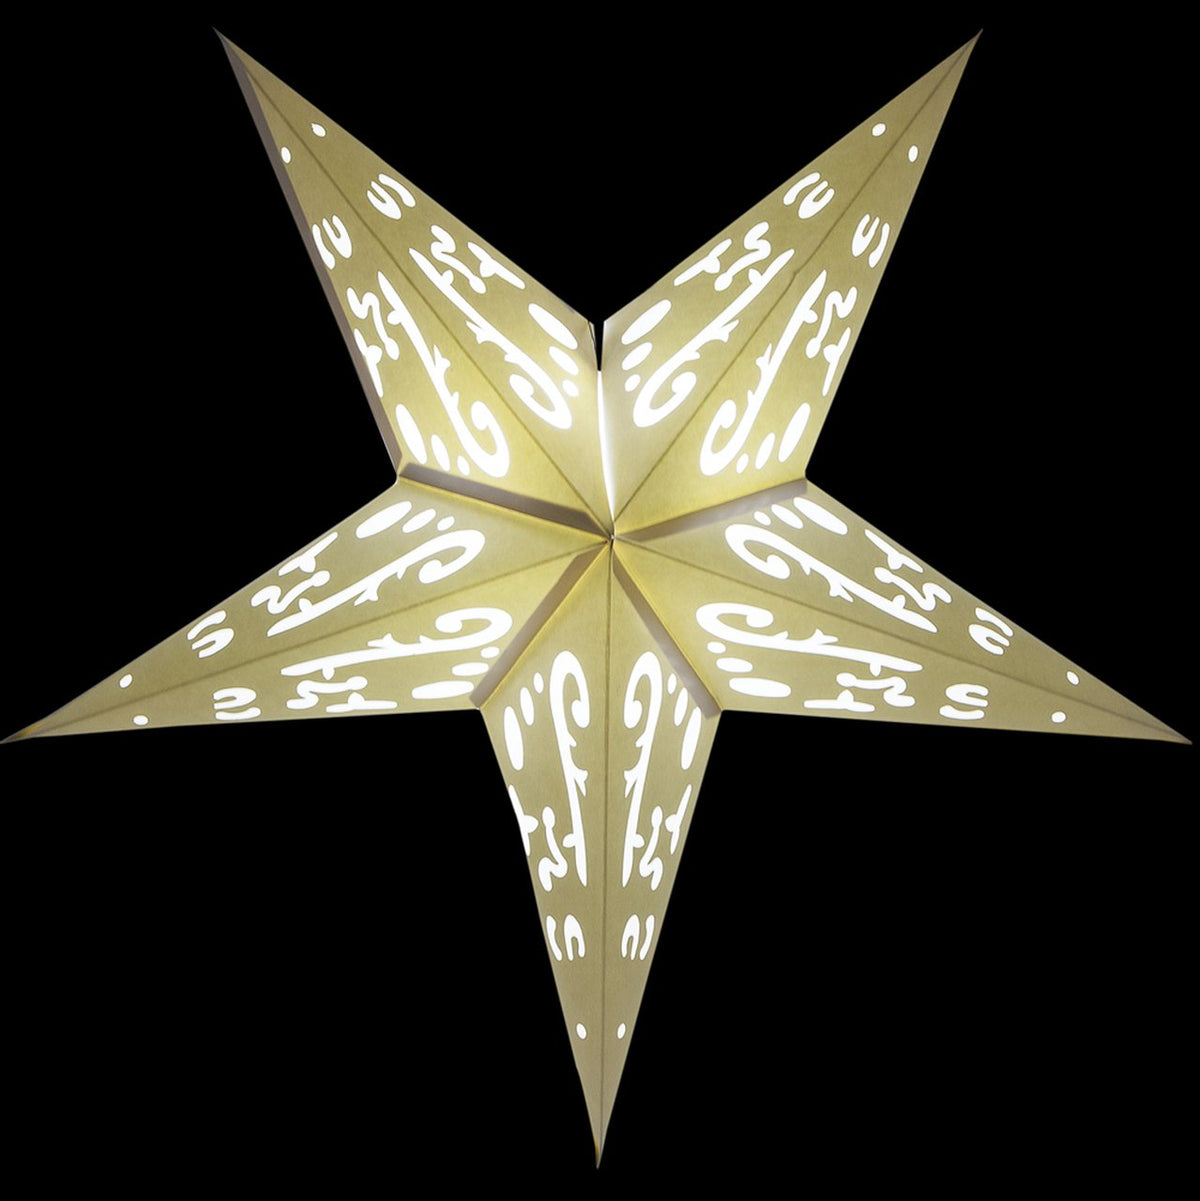 3-PACK + Cord | White Harmony 24" Illuminated Paper Star Lanterns and Lamp Cord Hanging Decorations - AsianImportStore.com - B2B Wholesale Lighting and Decor